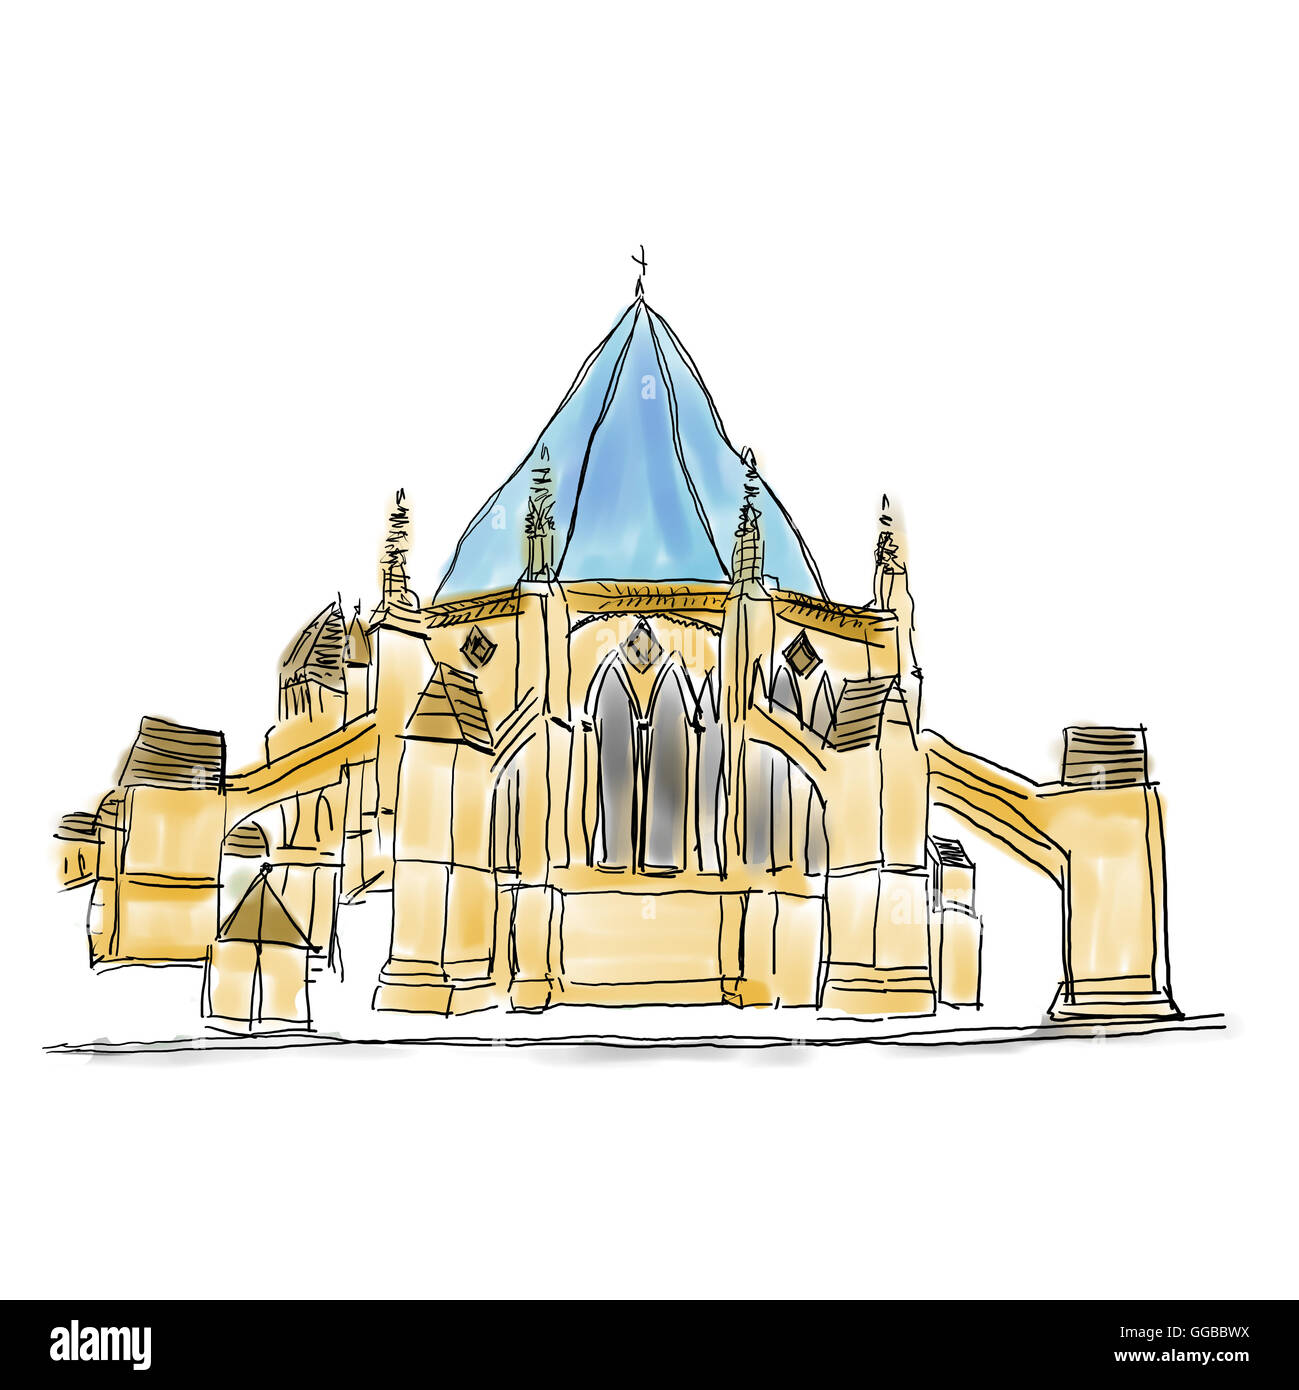 Cathedral freehand sketch on white background Stock Photo